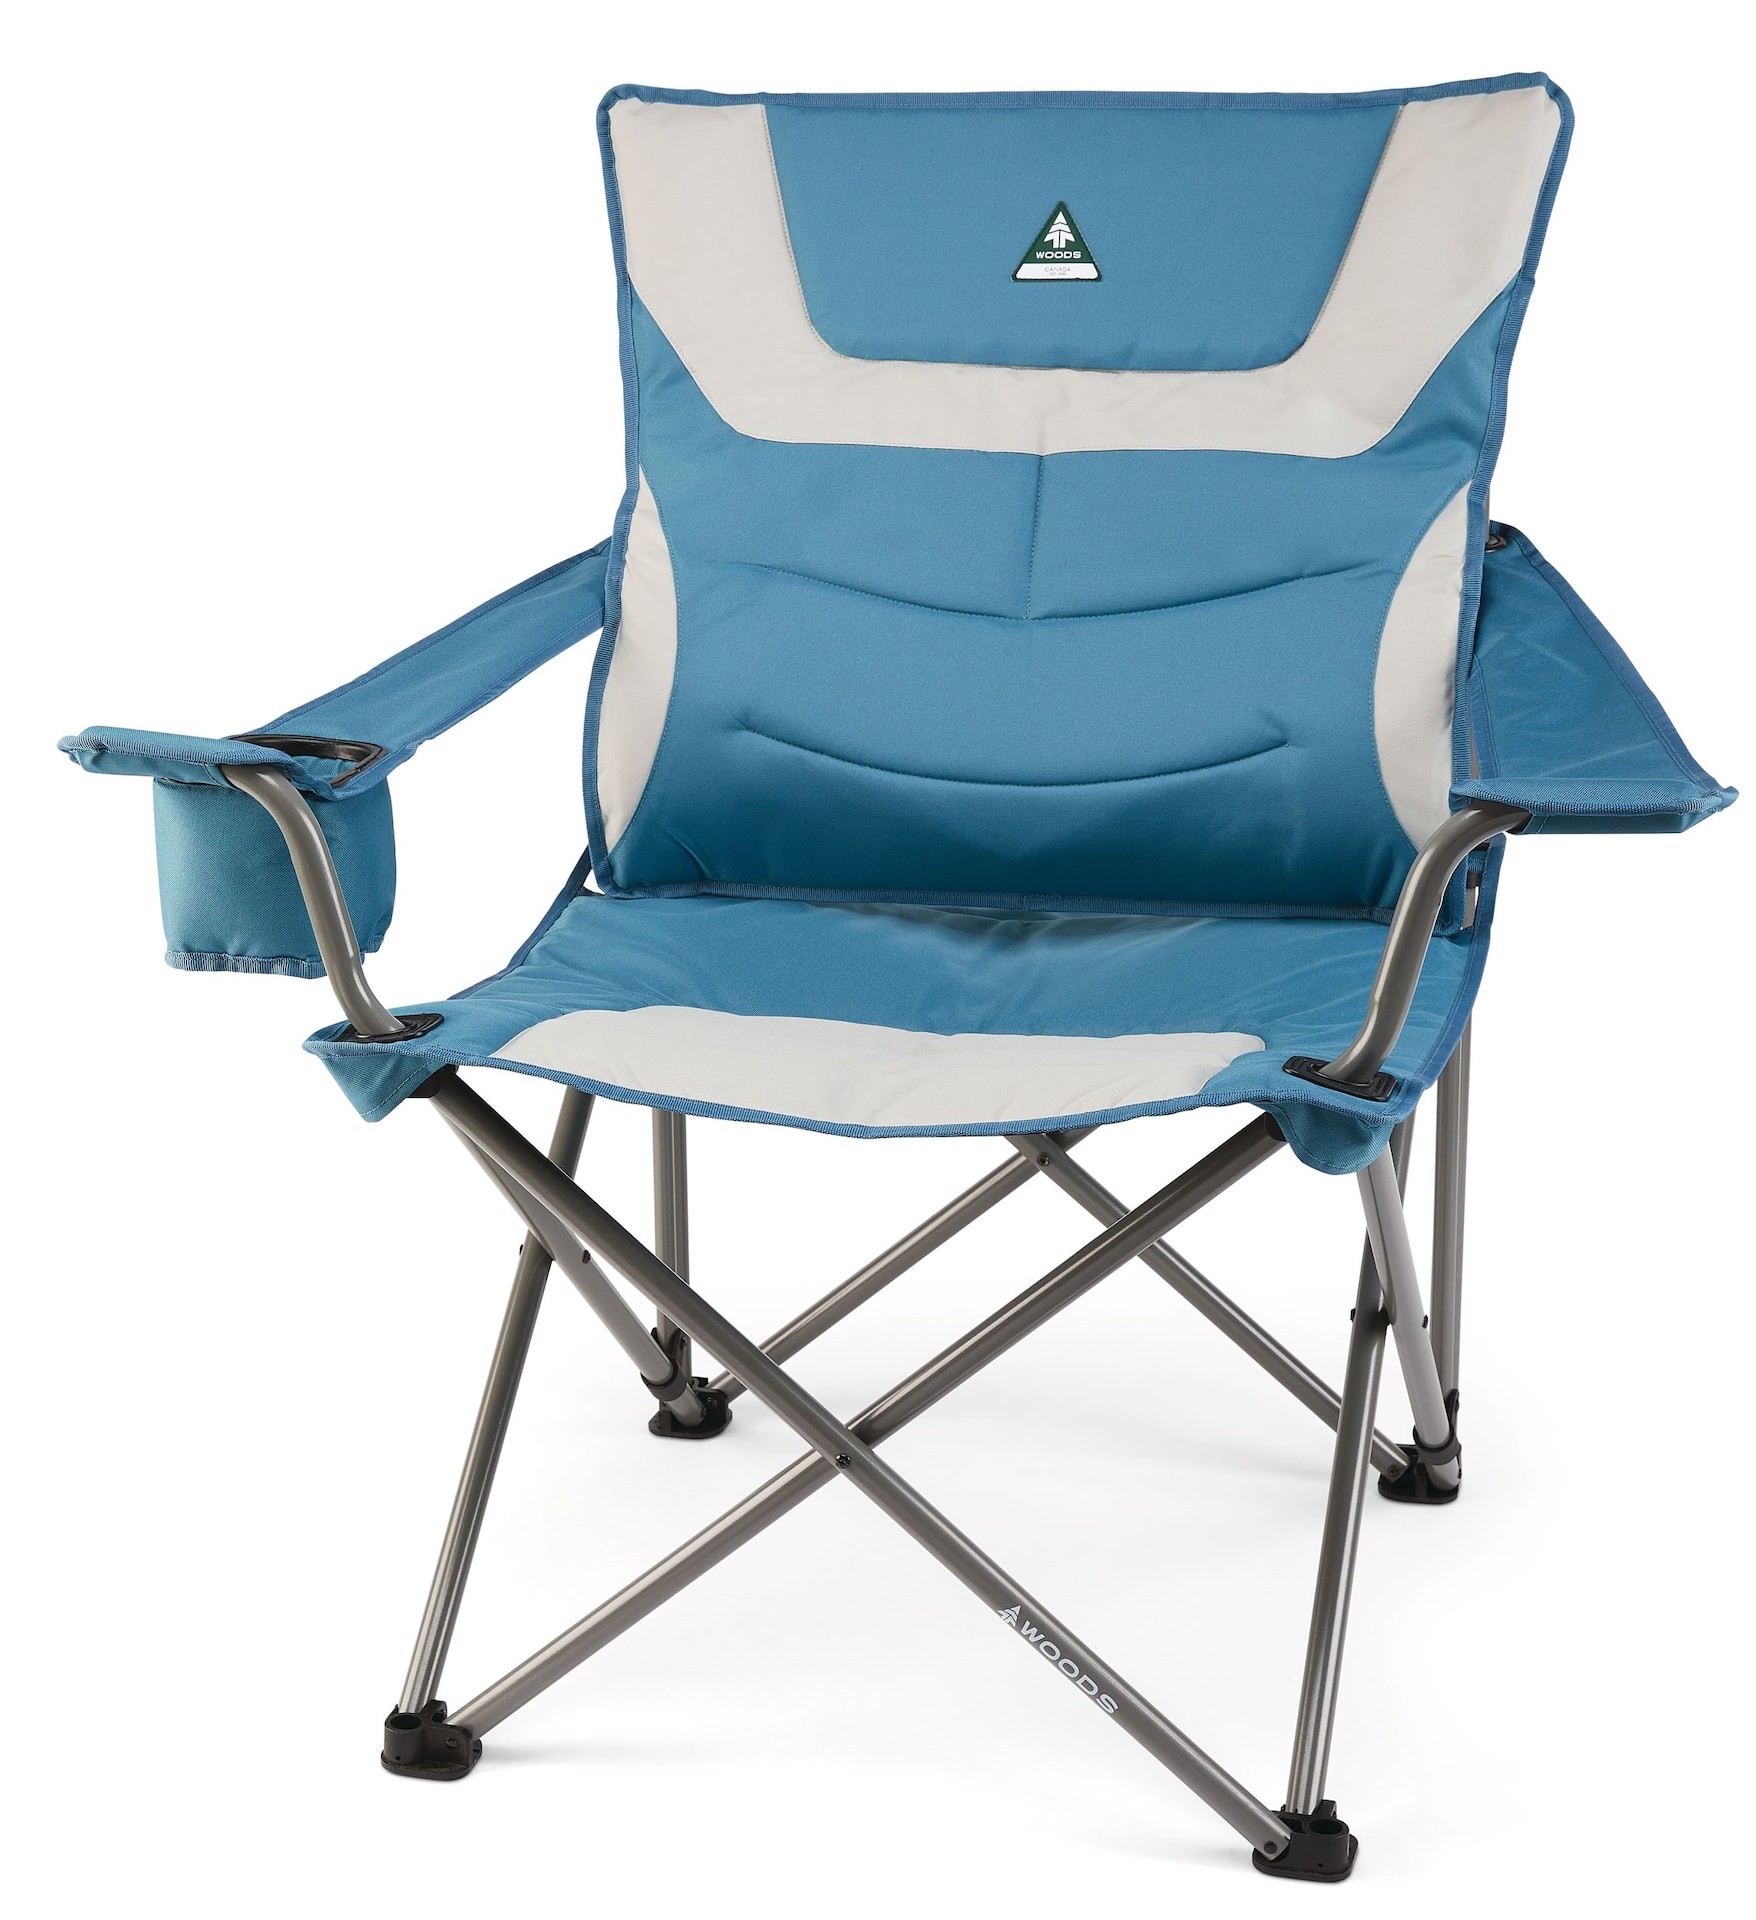 TimmyHouse Patio Folding Sling Back Chairs Camping Deck Garden